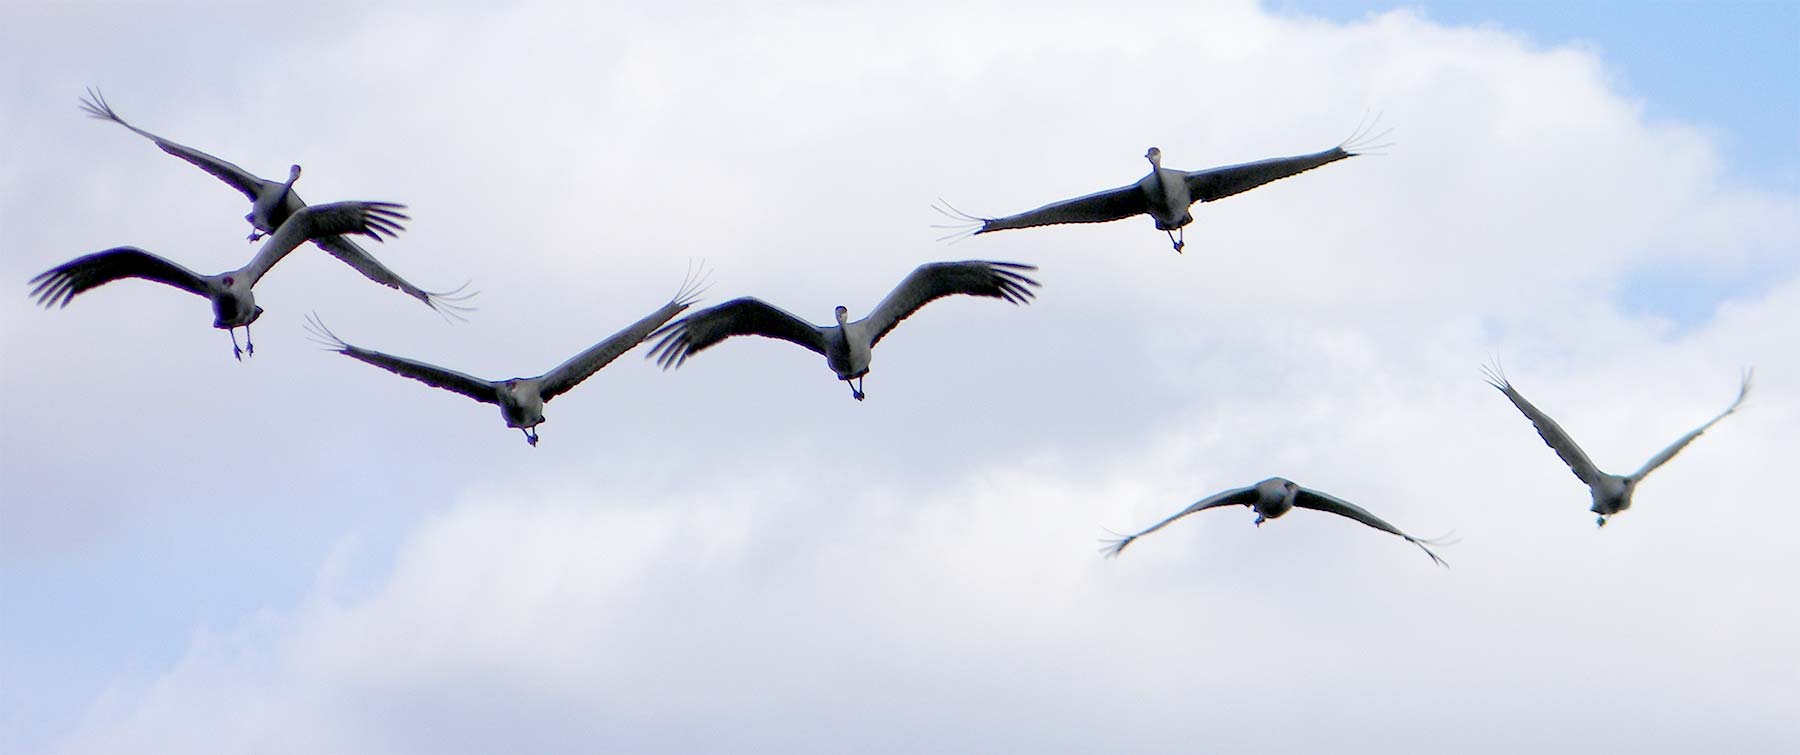 Flyover Cards (sandhill cranes - photo by Max)